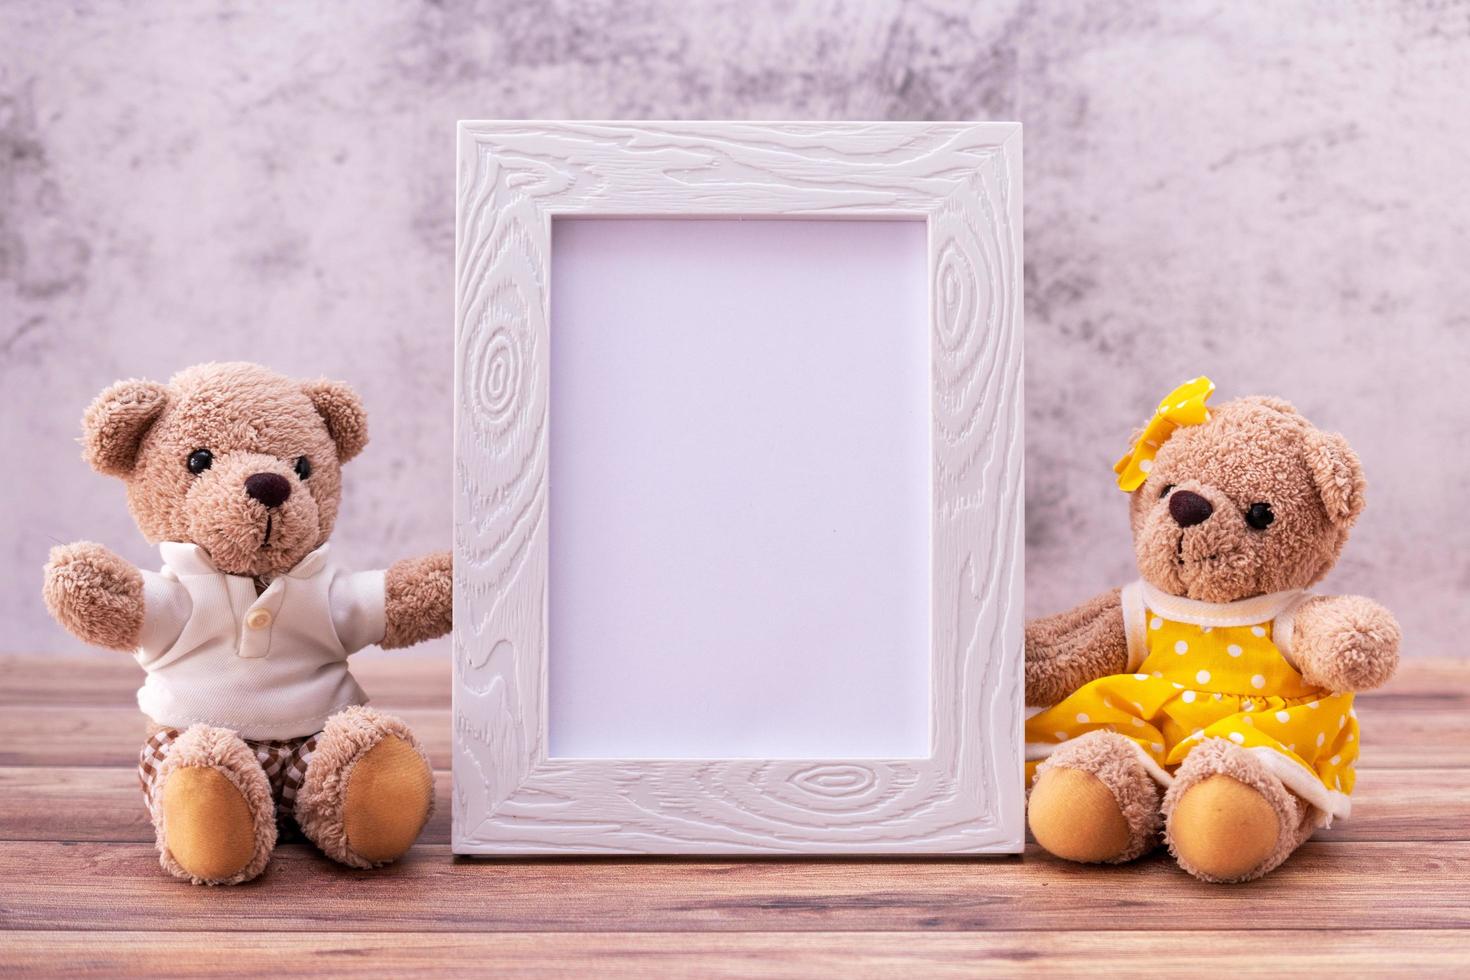 couple teddy bear with Picture frame on table wooden. Valentine's Day celebration photo